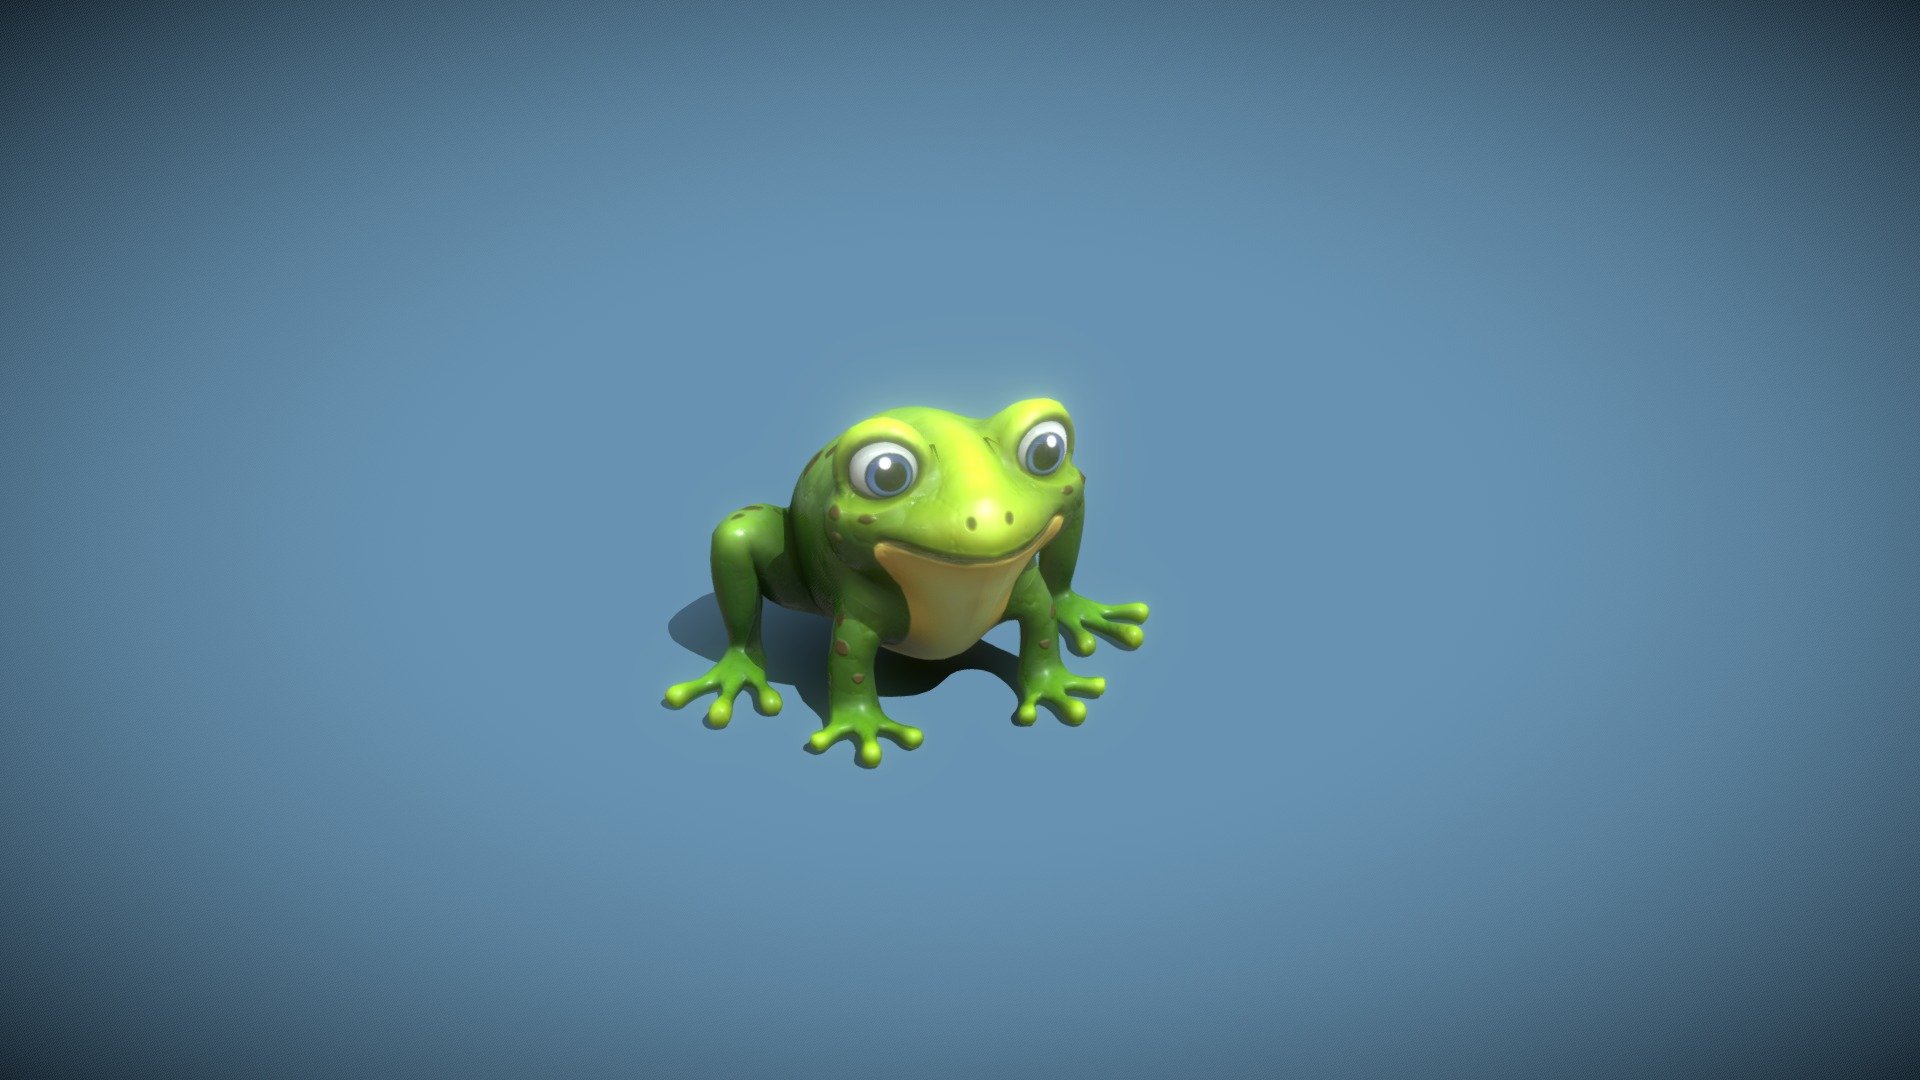 Cartoon Frog 3D Model is completely ready to be used in your games, animations, films, designs etc.  

All textures and materials are included and mapped in every format. The model is completely ready for use visualization in any 3d software and engine.  

Technical details:  




File formats included in the package are: FBX, OBJ, GLB, ABC, DAE, PLY, STL, BLEND, gLTF (generated), USDZ (generated)

Native software file format: BLEND

Render engine: Eevee

Polygons: 4,140

Vertices: 4,083

Textures: Color, Metallic, Roughness, Normal, AO.

All textures are 2k resolution.
 - Cartoon Frog 3D Model - Buy Royalty Free 3D model by 3DDisco 3d model